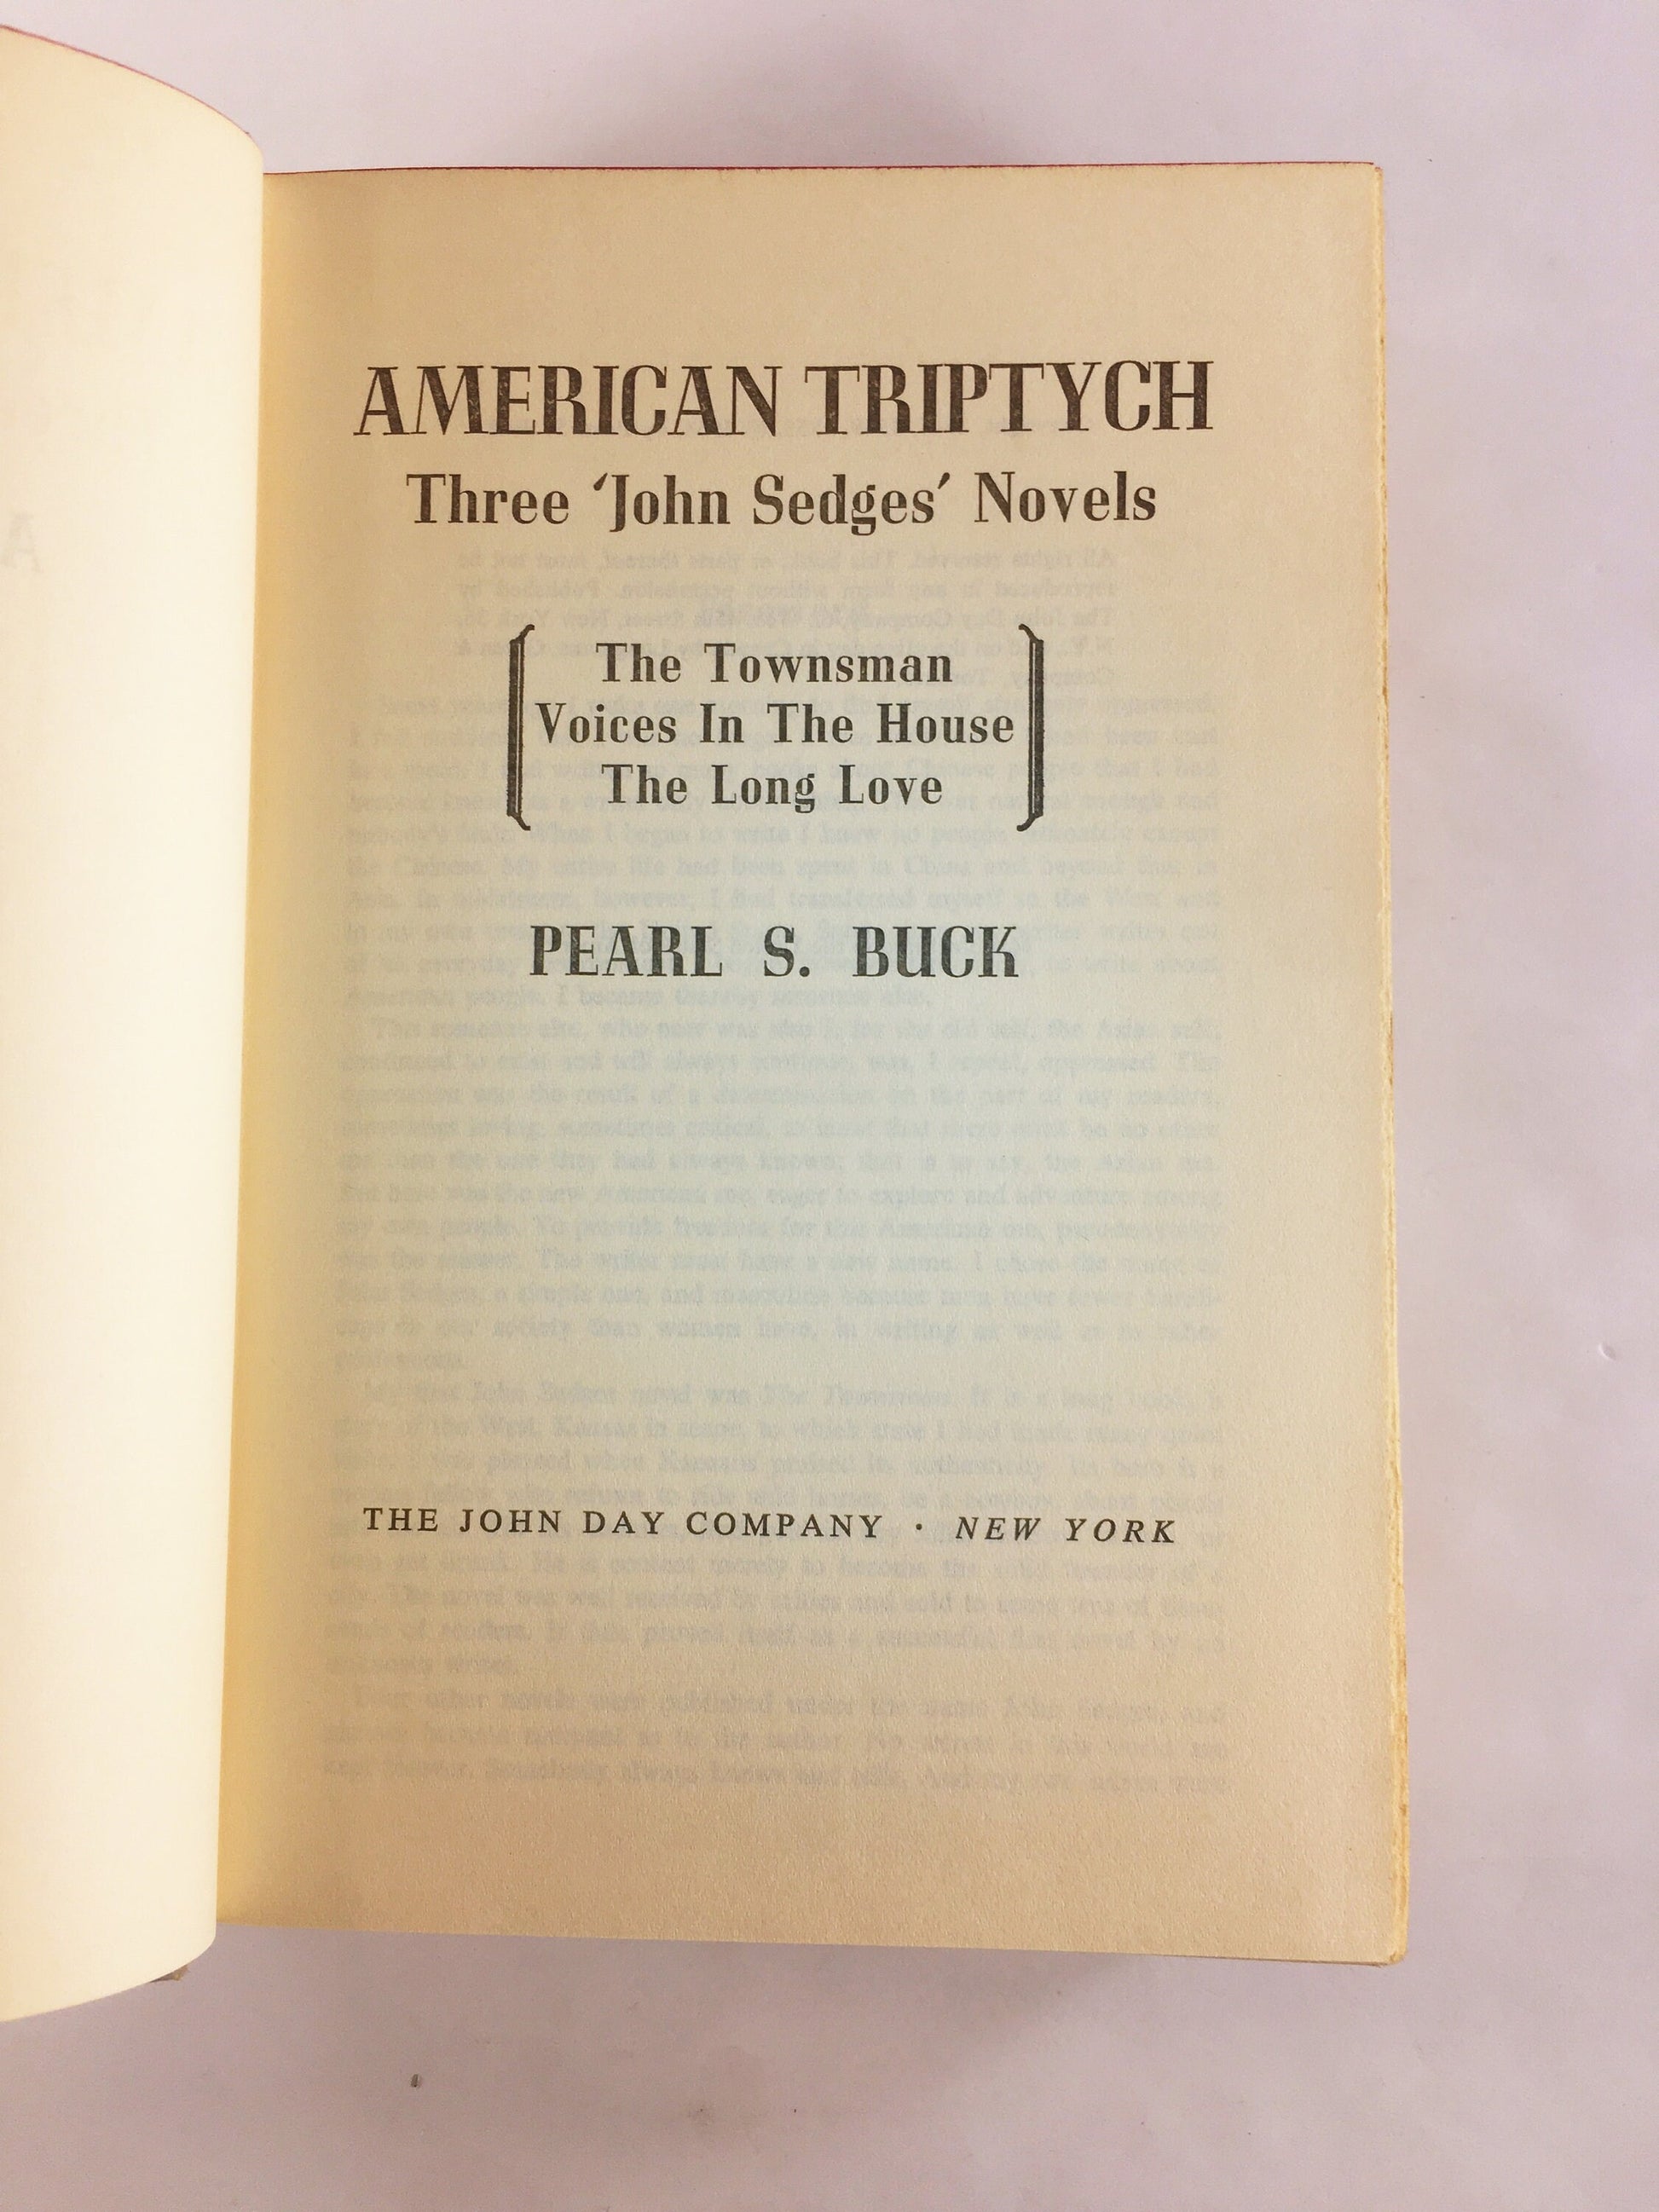 American Triptych vintage book by Pearl S Buck Three John Sedges Novels circa 1958. Townsman, Voices in the House, Long Love. Gray decor